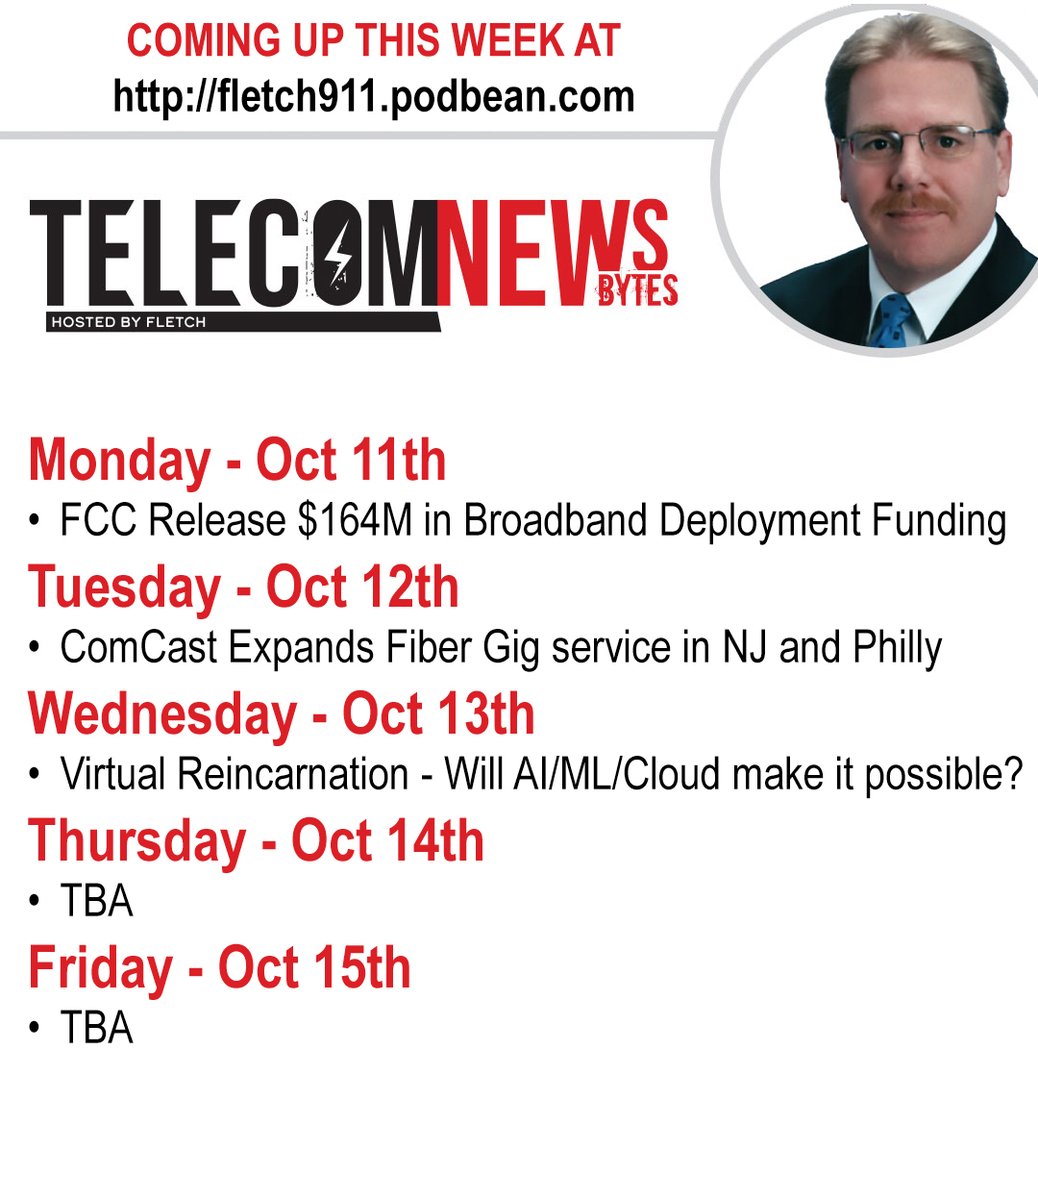 LOCKED & LOADED - The first 3 of 5 short articles this week on #TelecomNewsBytes, important News, Events, and a little bit of weird stuff. This week @FCC Broadband Funding, @ComCast's Fiber Gig-Ethernet Expansion, and #VirtualReincarnation? fletch911.podbean.com